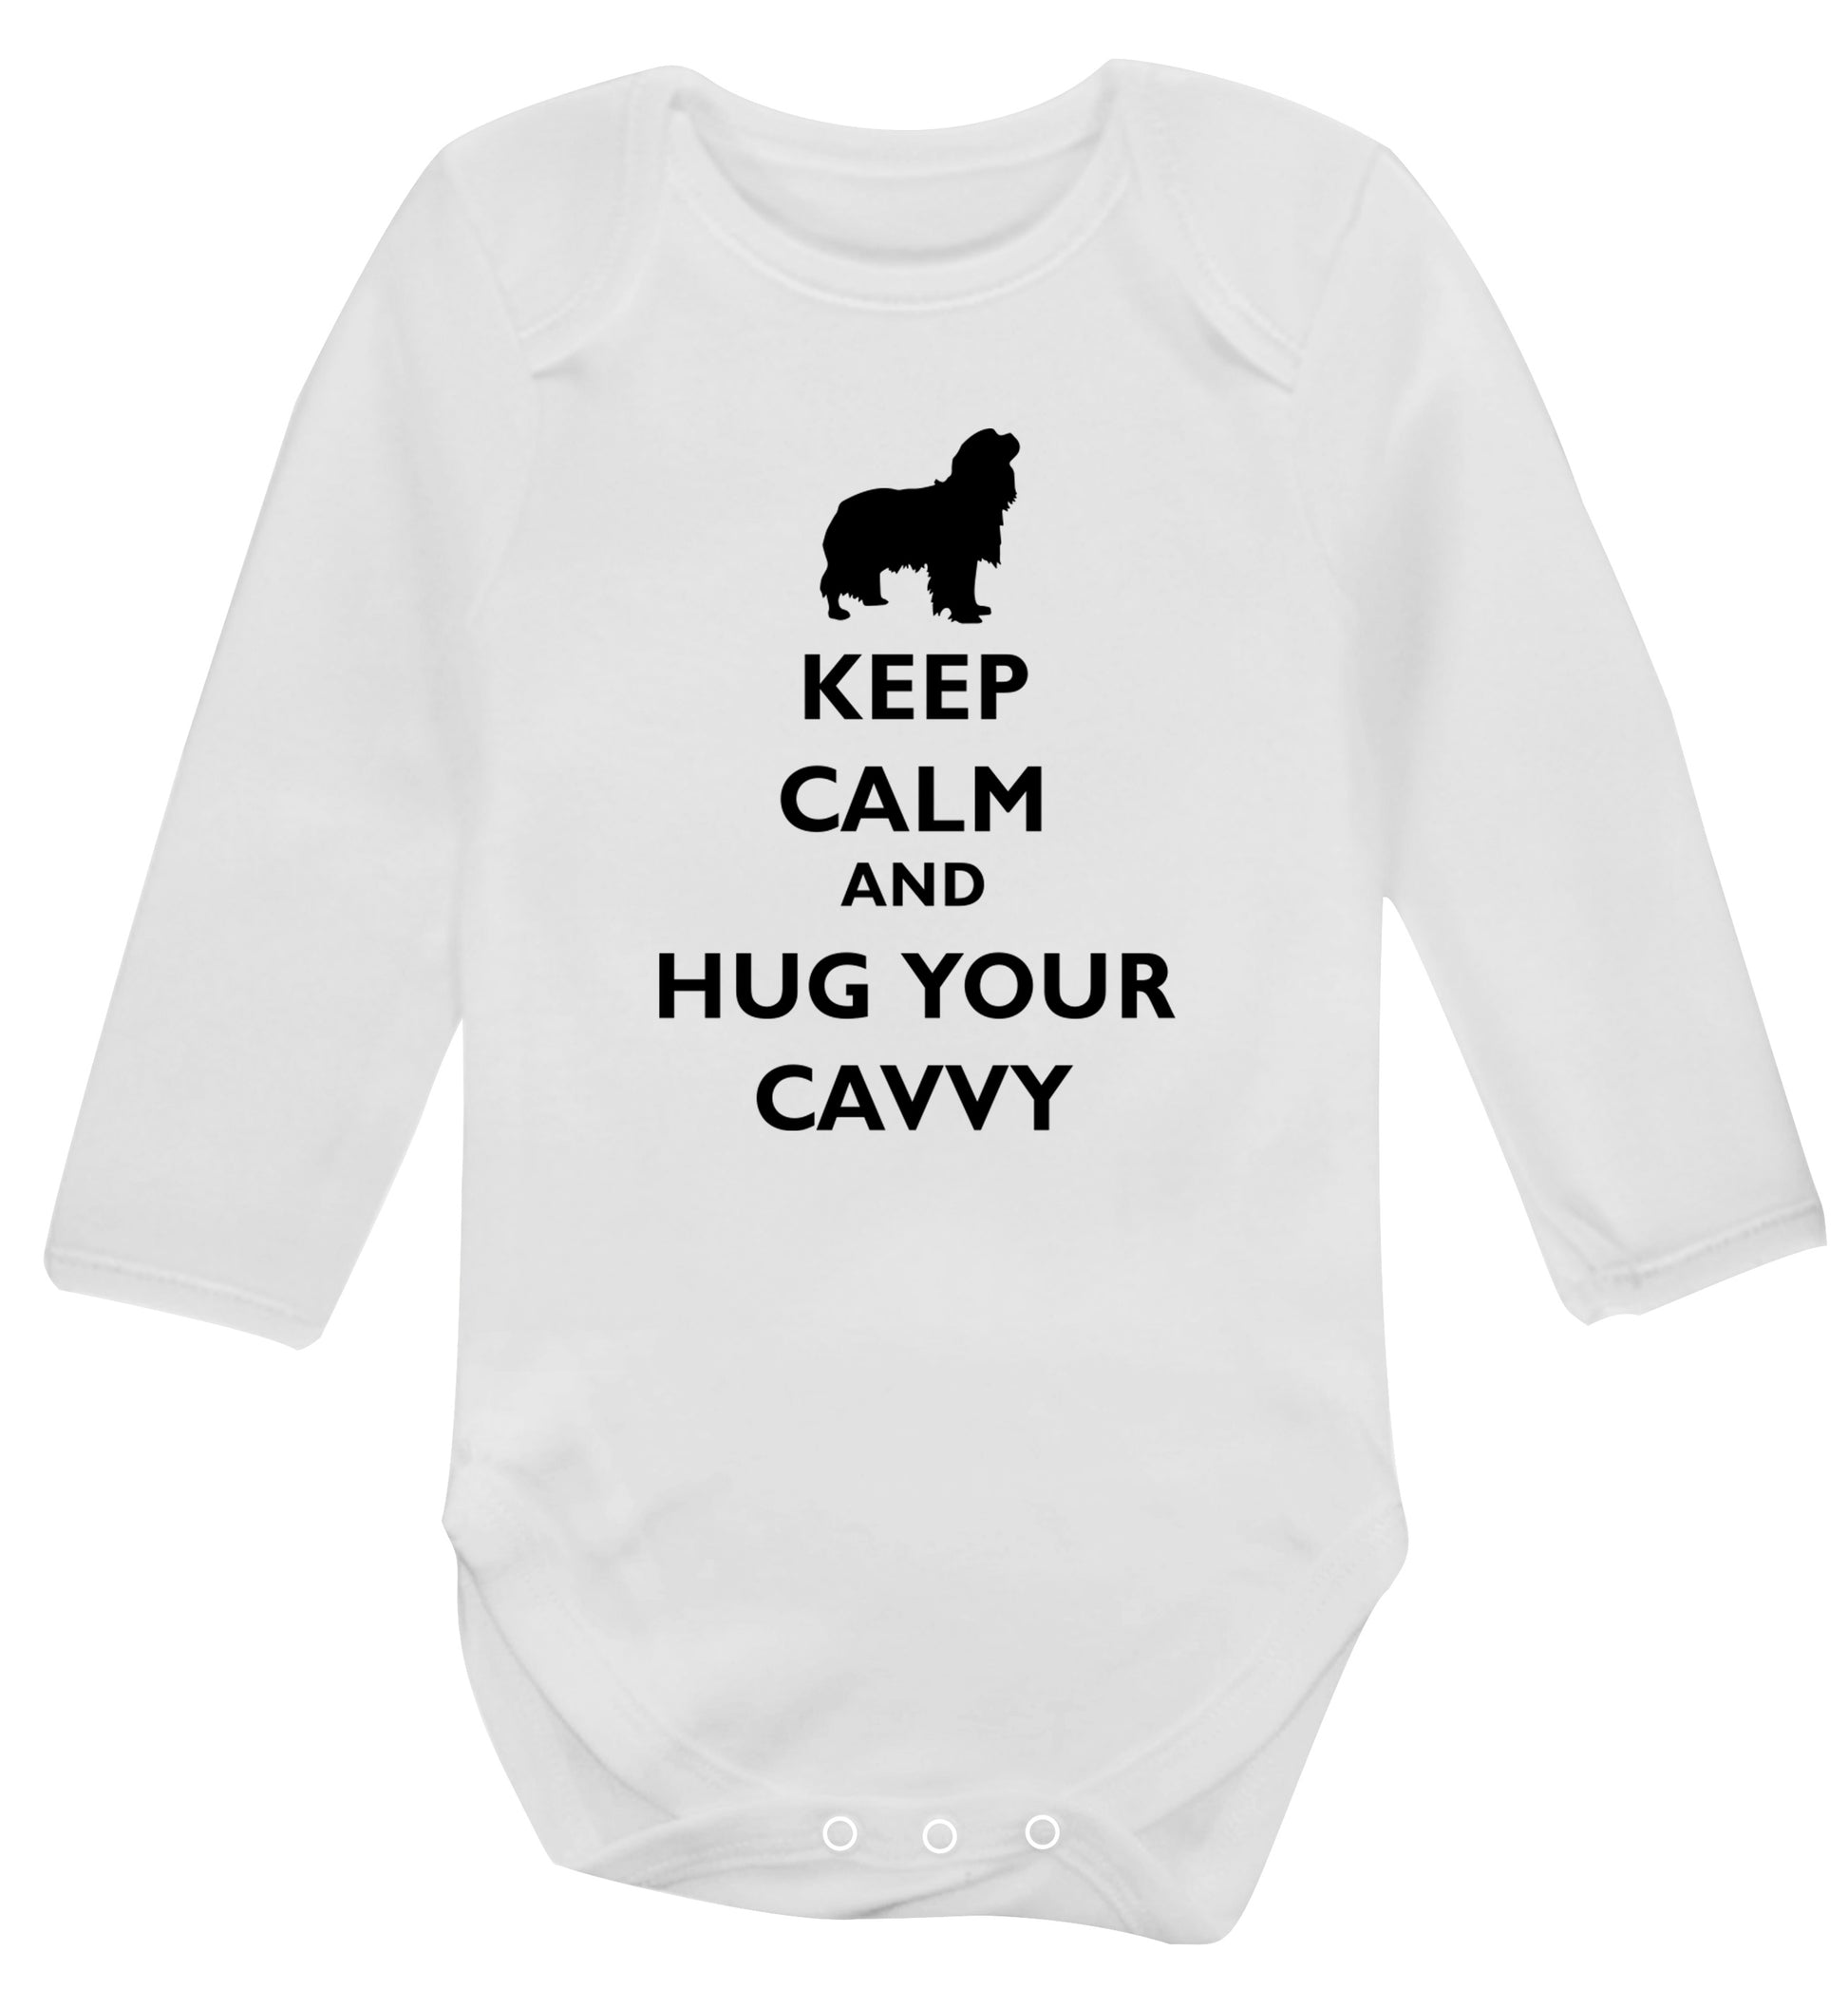 Keep calm and hug your cavvy Baby Vest long sleeved white 6-12 months